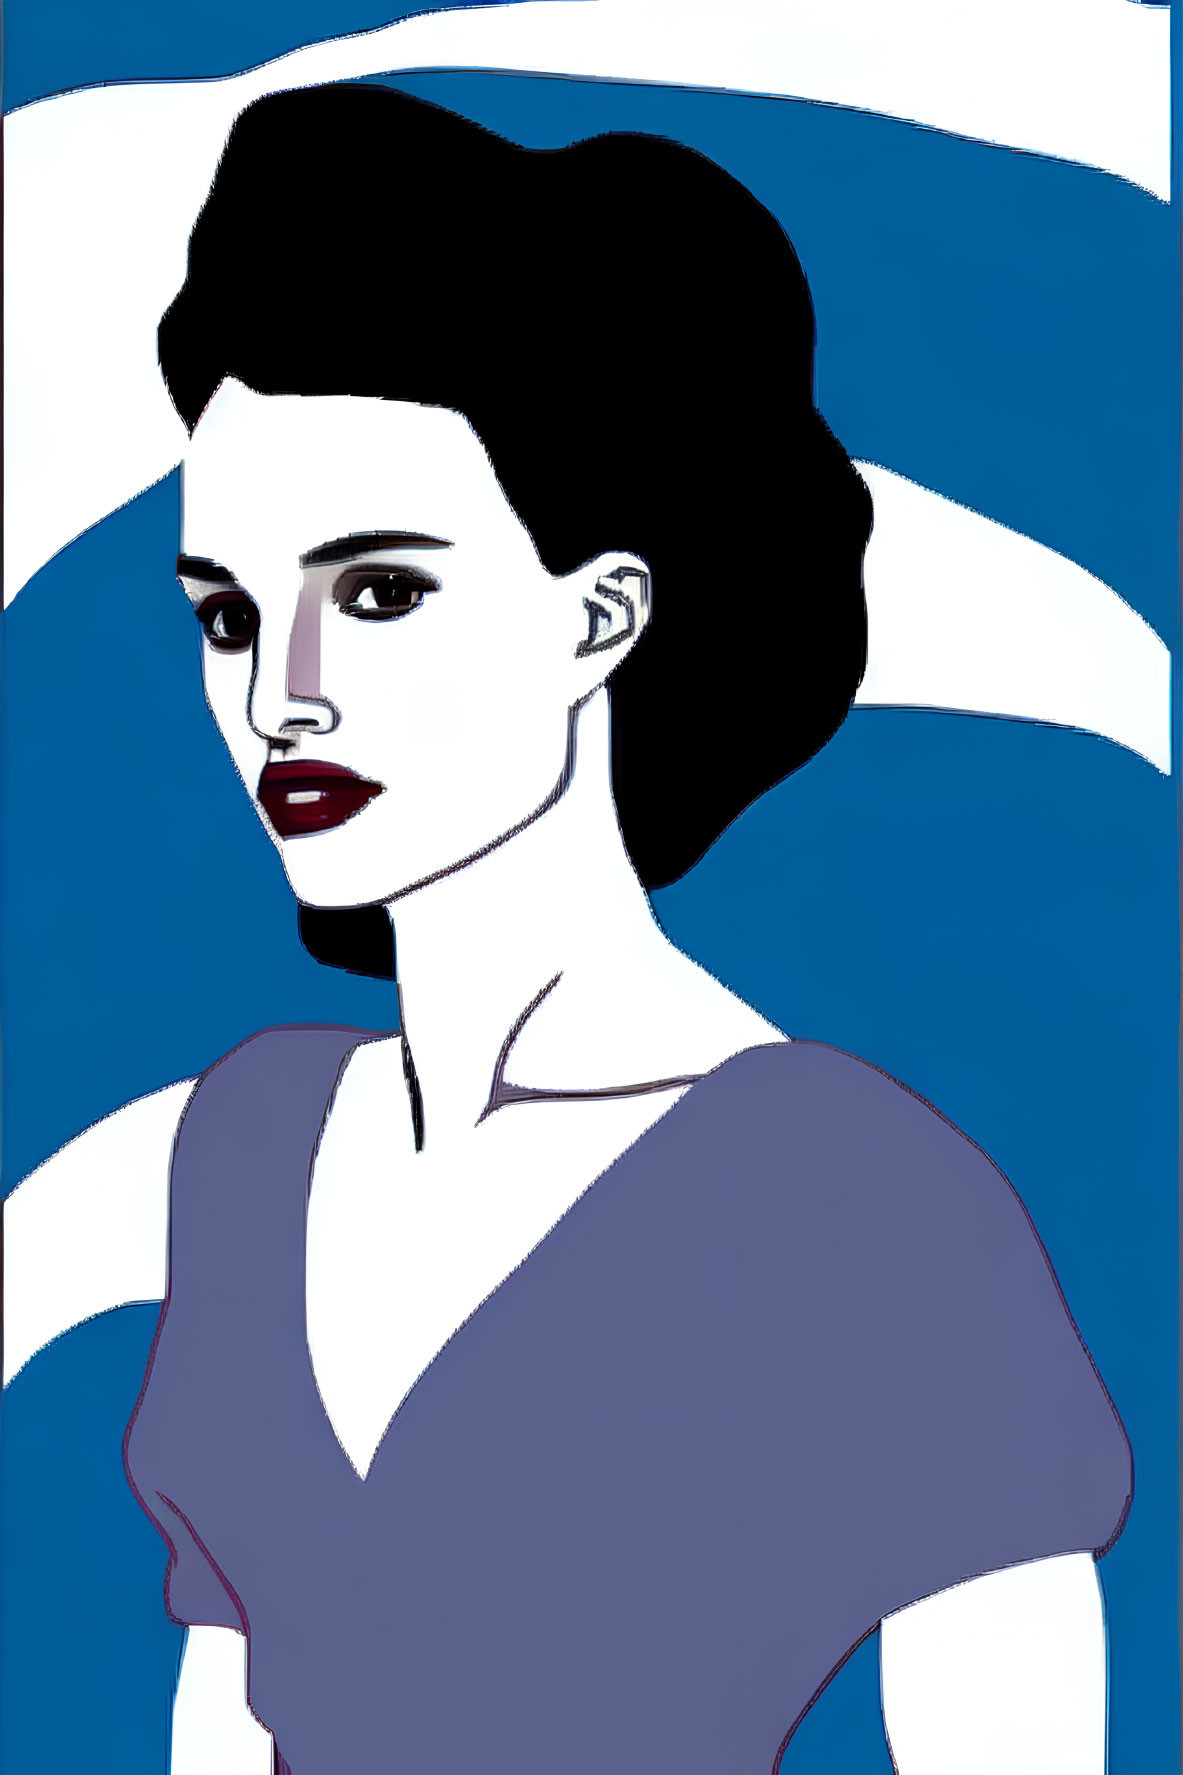 Stylized illustration of woman with dark hair and red lips in purple dress on blue background